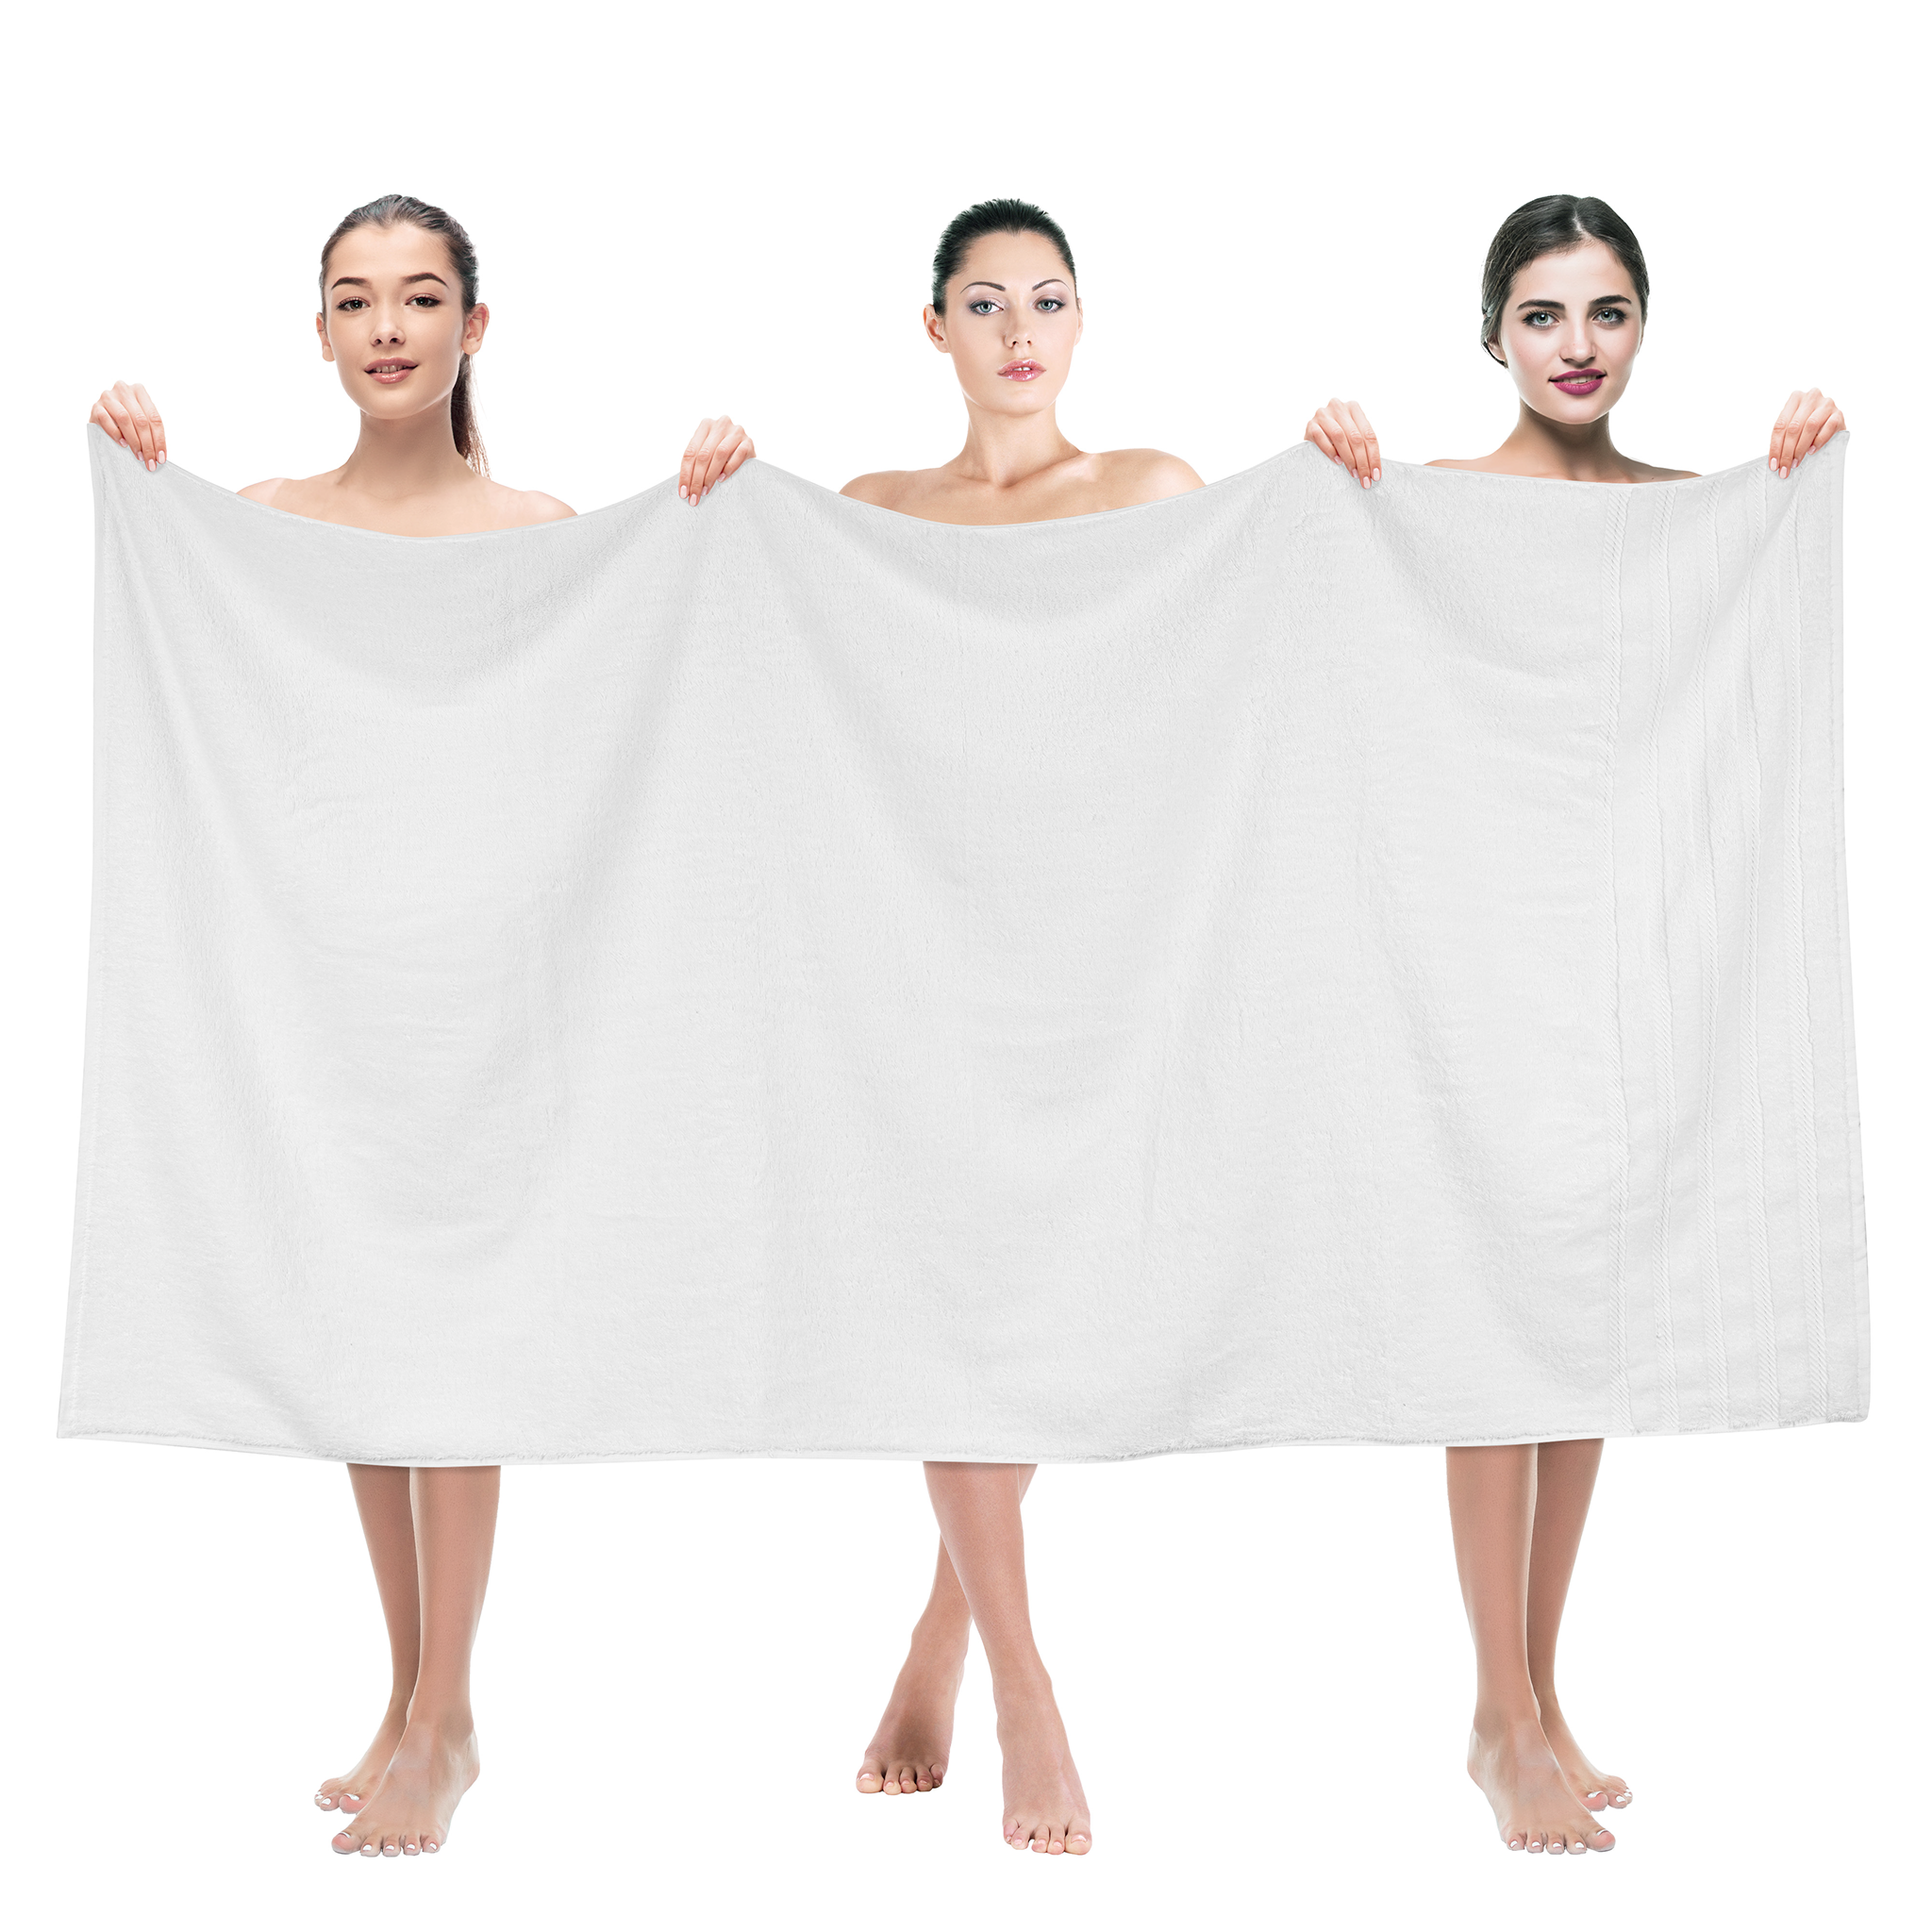 Luxury Bath Sheet Towels Extra Large |35x70 Inch| 2 Pk, Silver Highly  Absorbent